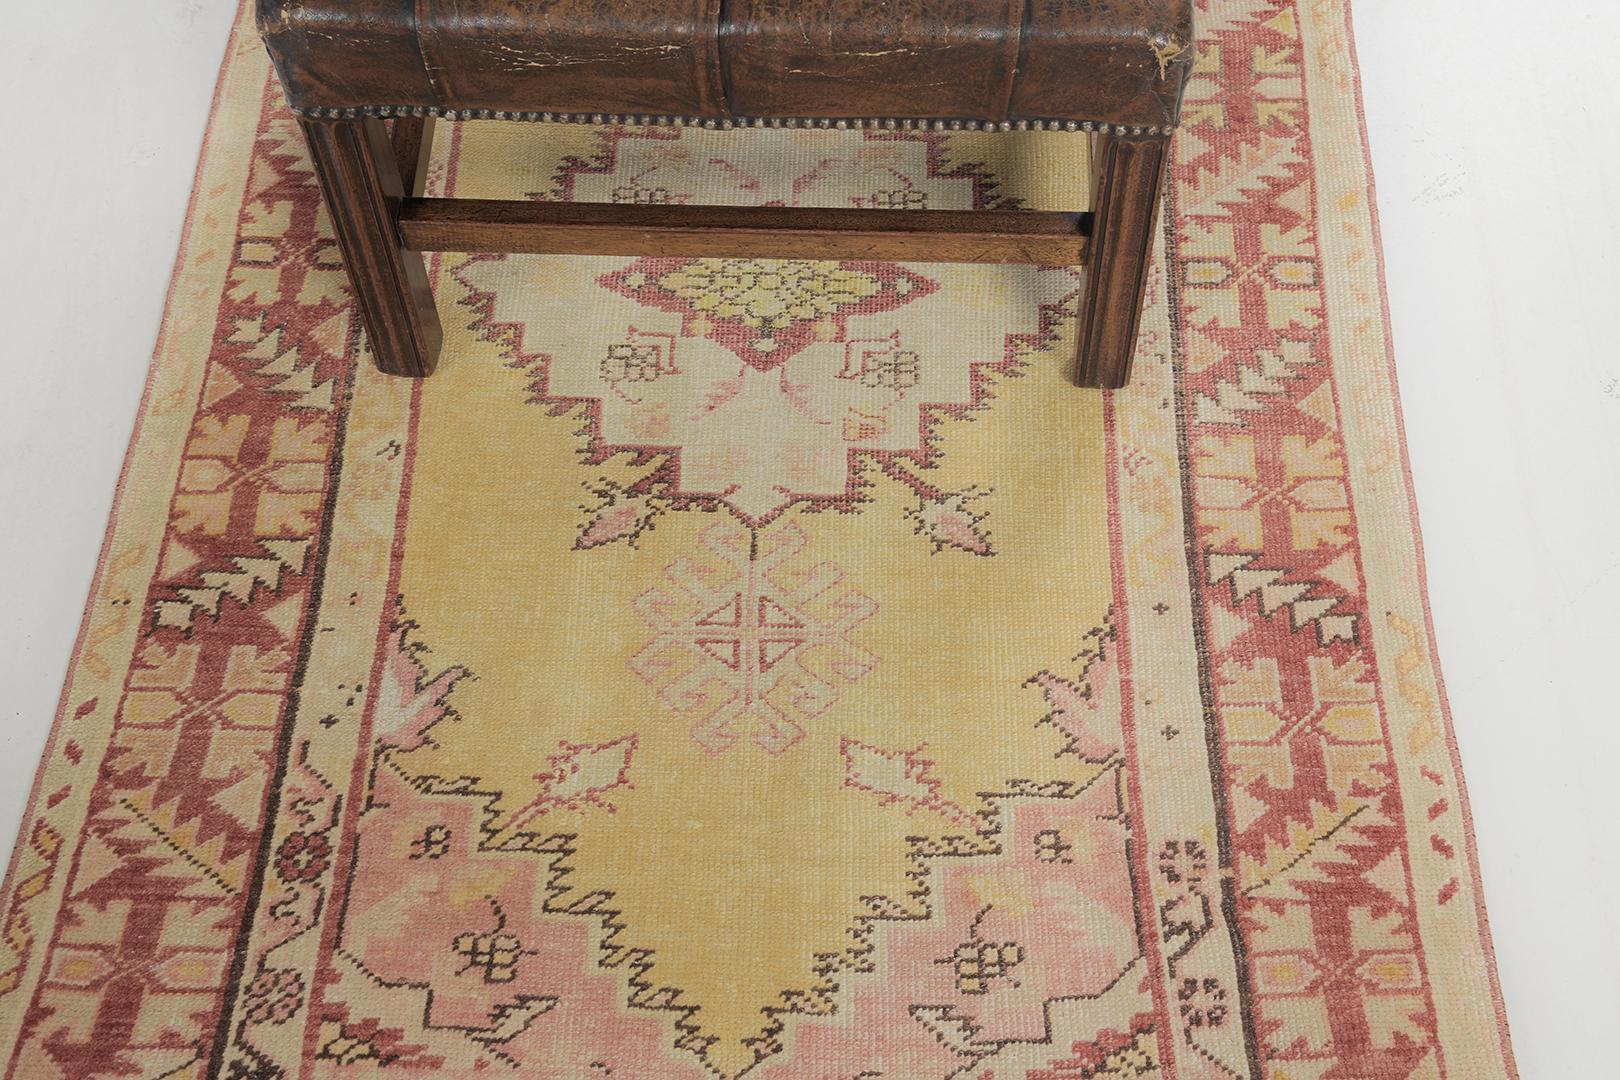 This elegant and timeless Turkish Anatolian rug made from vegetable dye has an intricate and clear symmetric design. Guney has a blooming red color palette and golden yellow at its core perfectly matches the neutral motifs reflected. If you want a